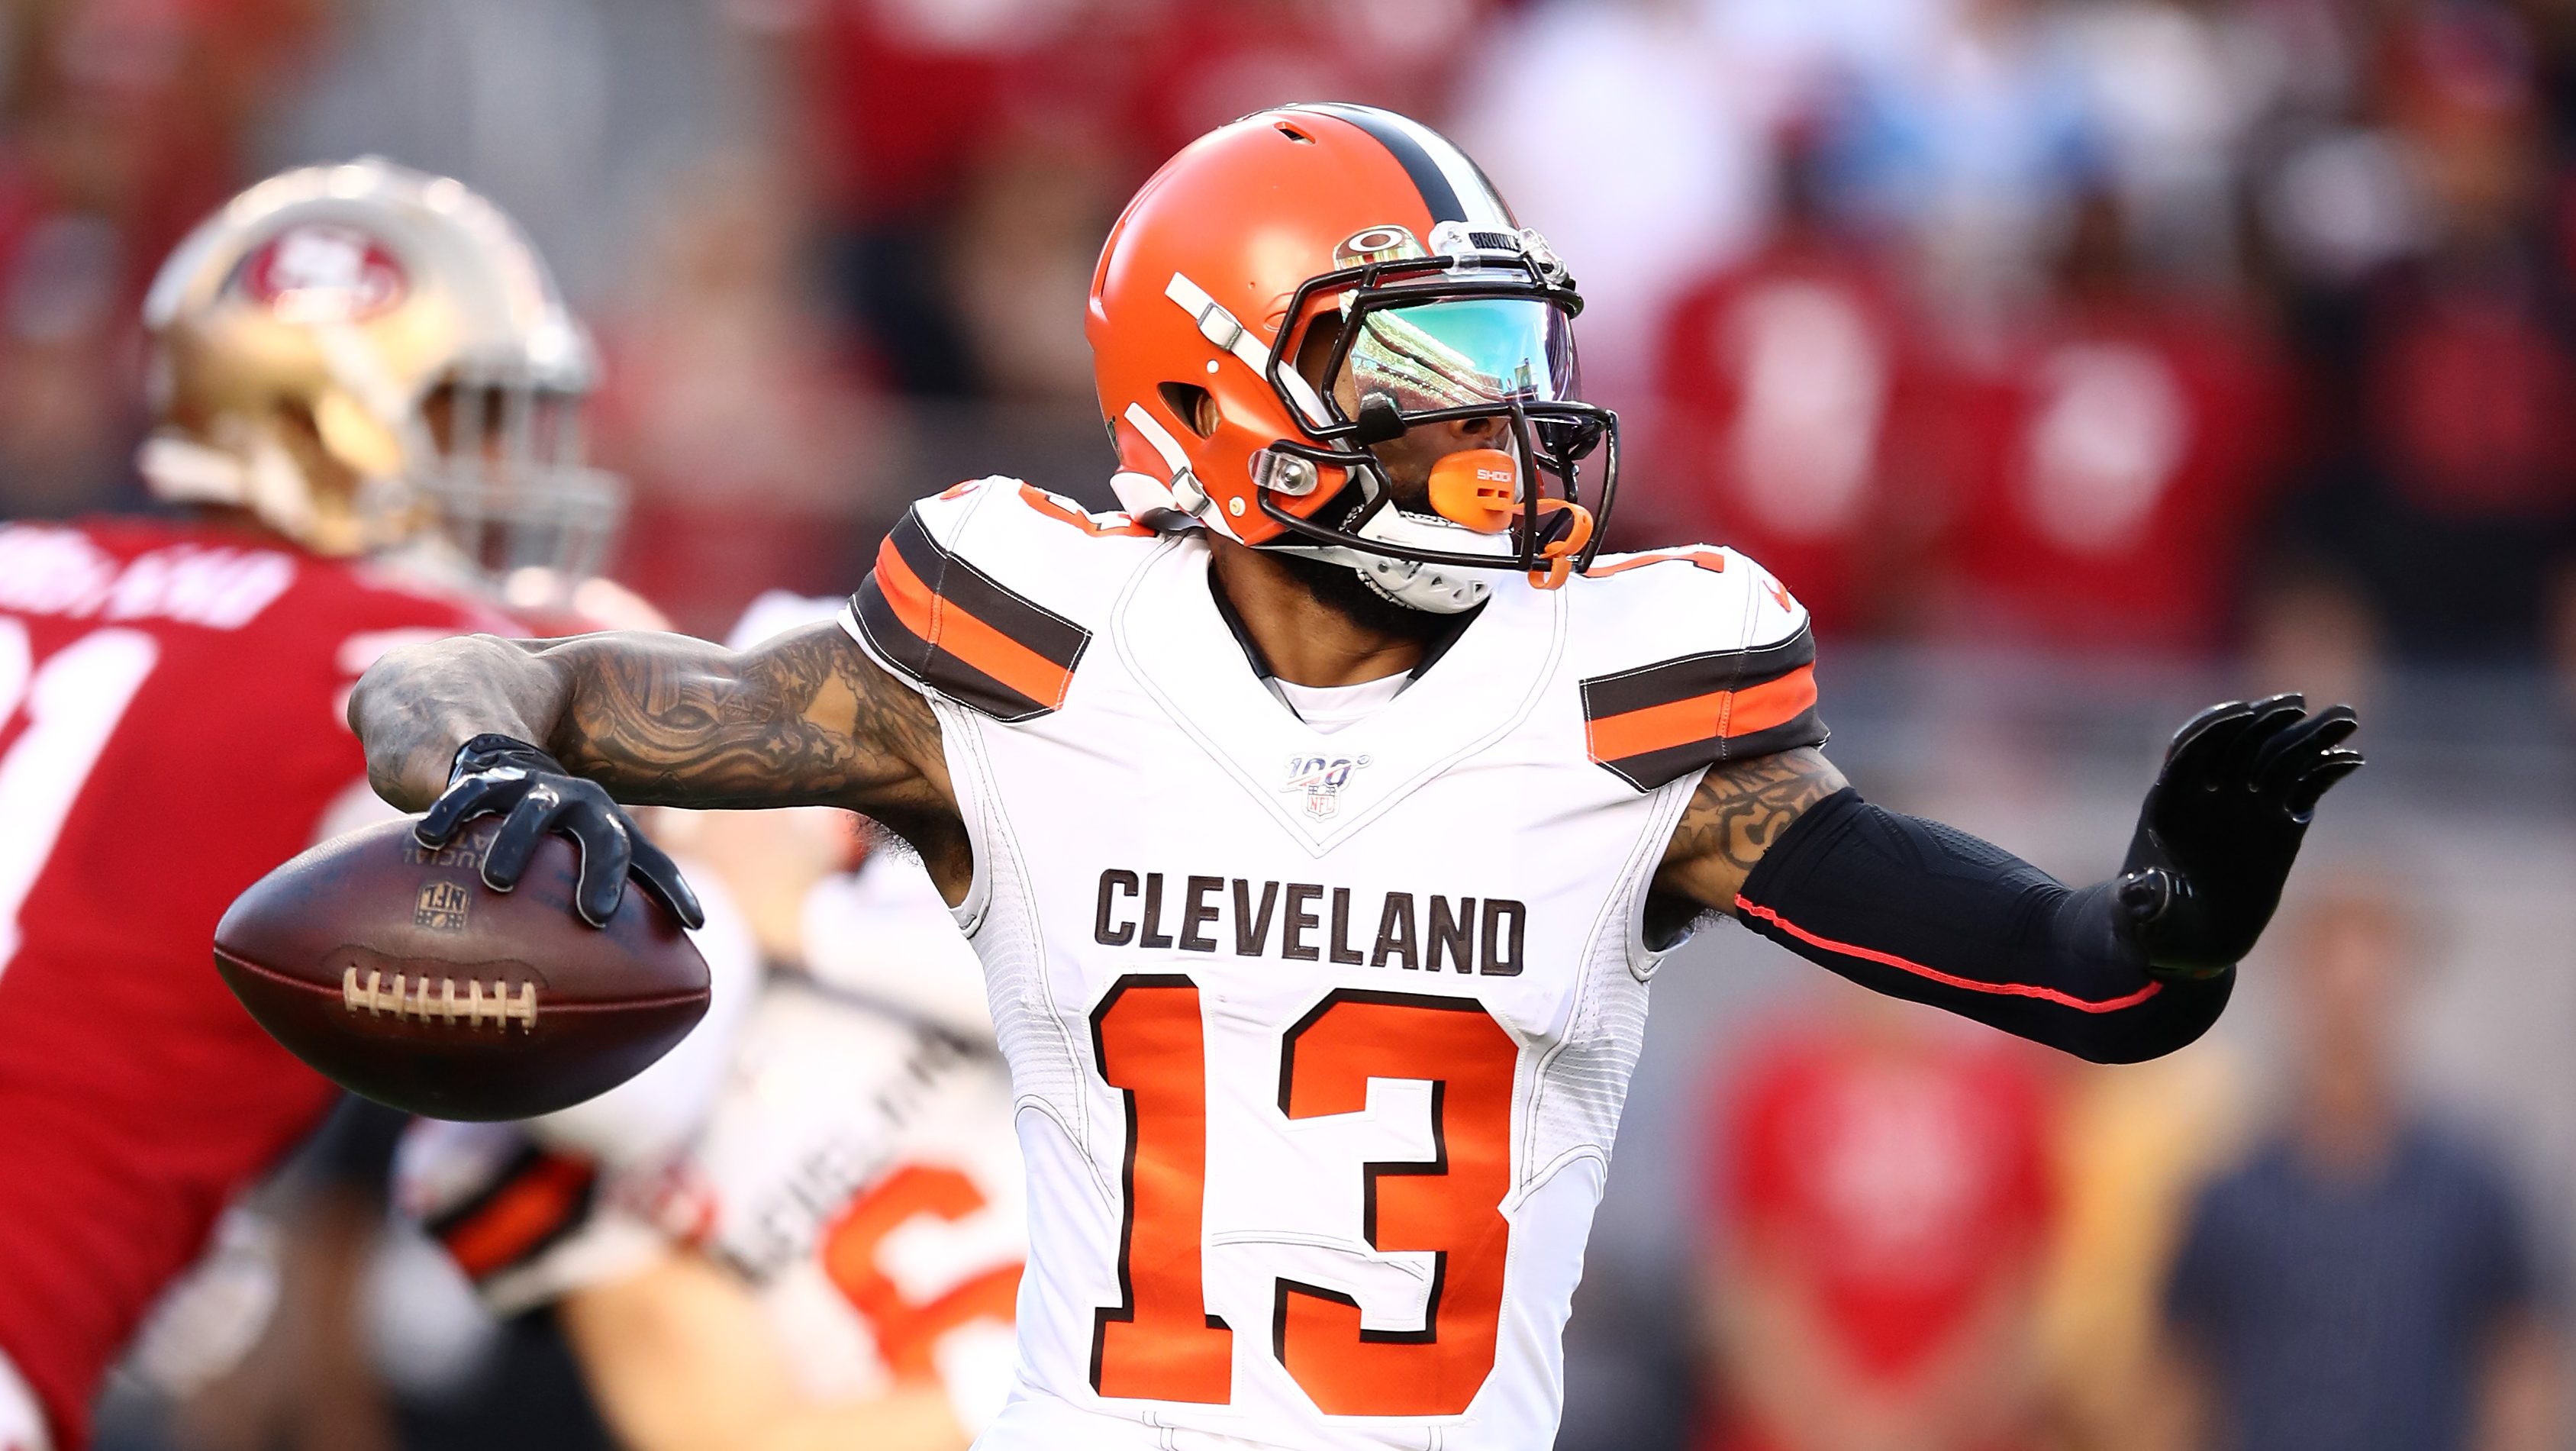 Odell Beckham Jr. is heading to the Browns